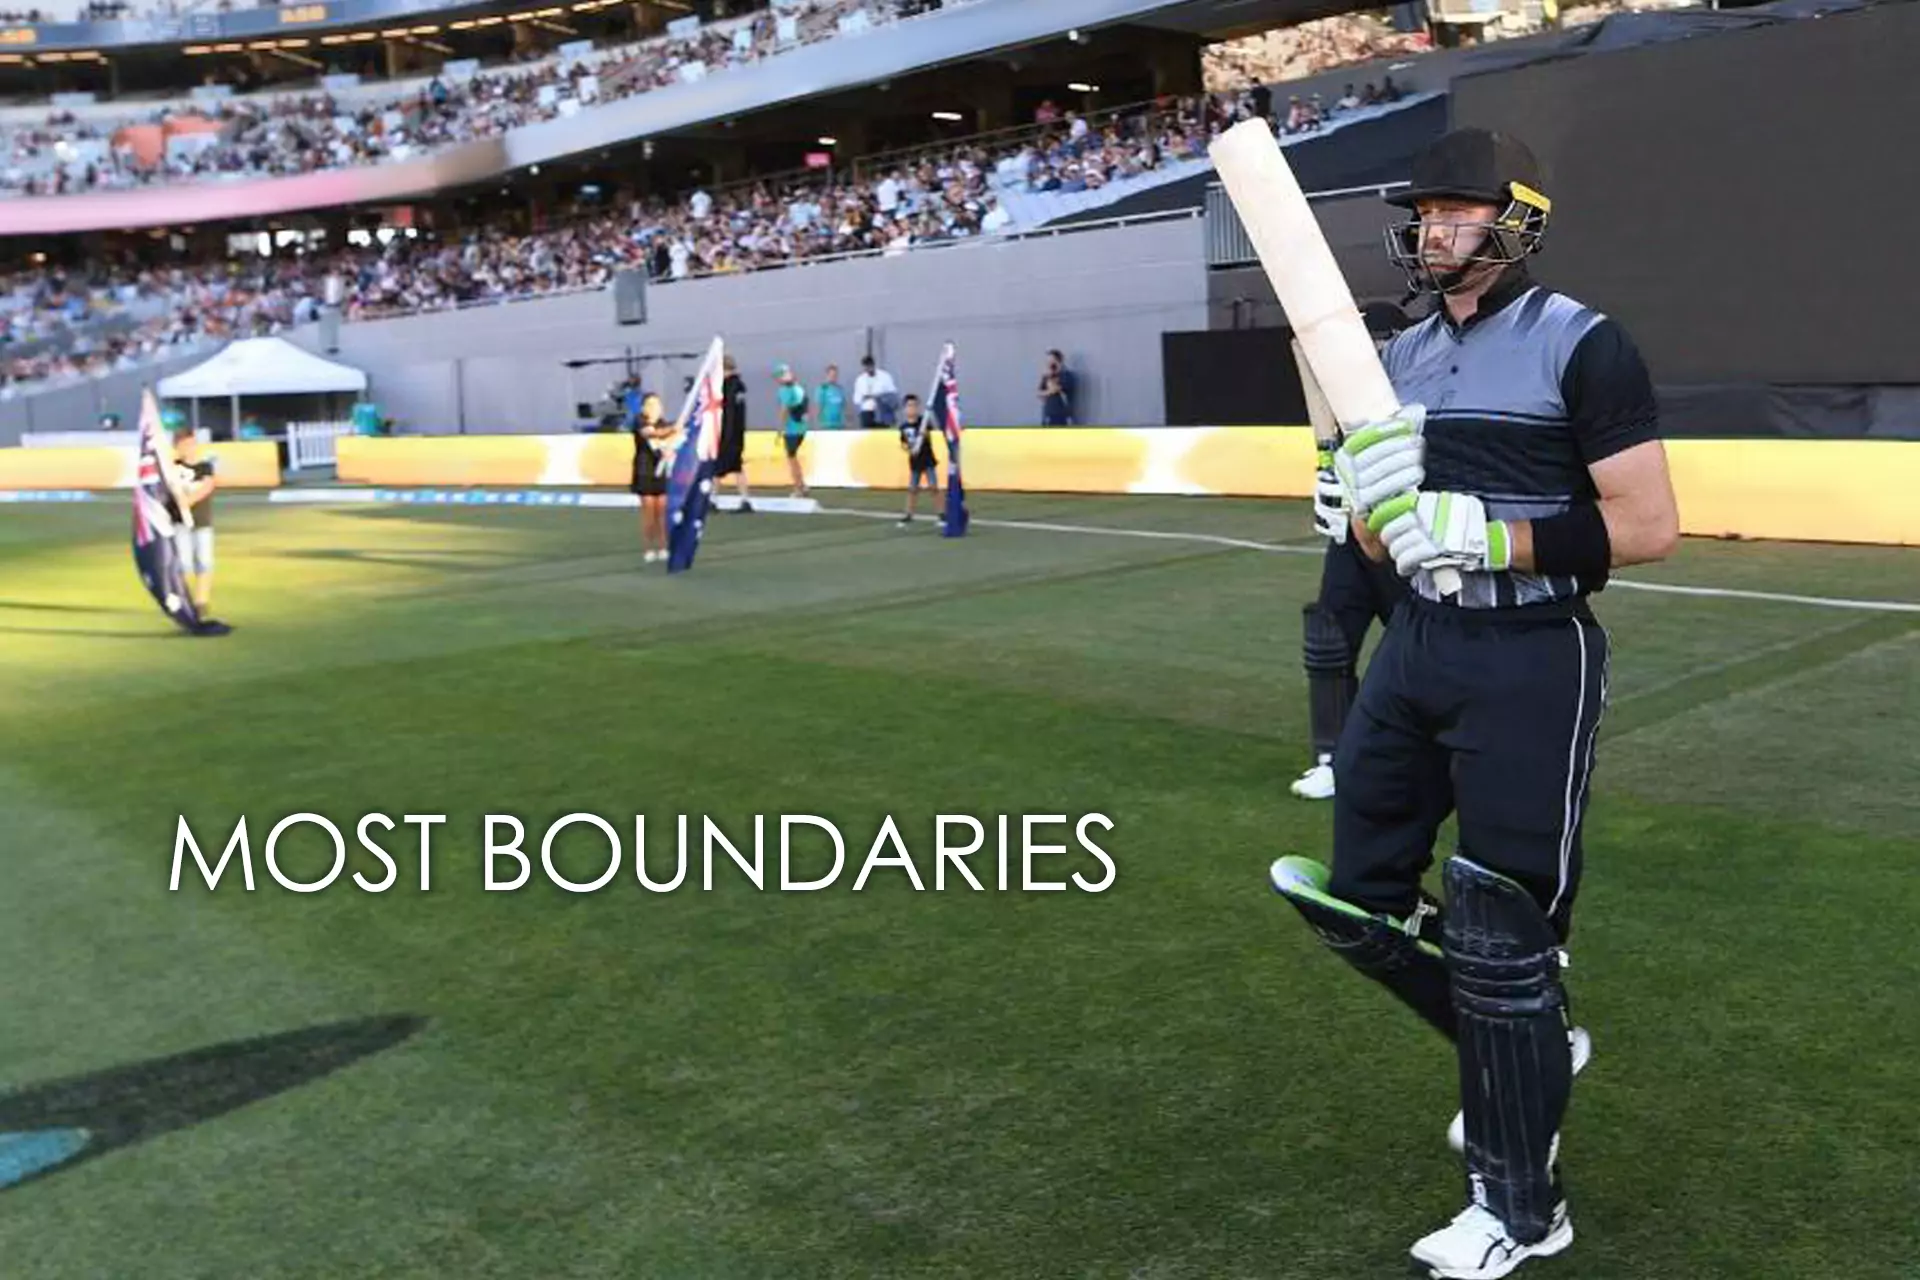 In the Most Boundaries section, you have to predict the team getting the most sixes and fours.